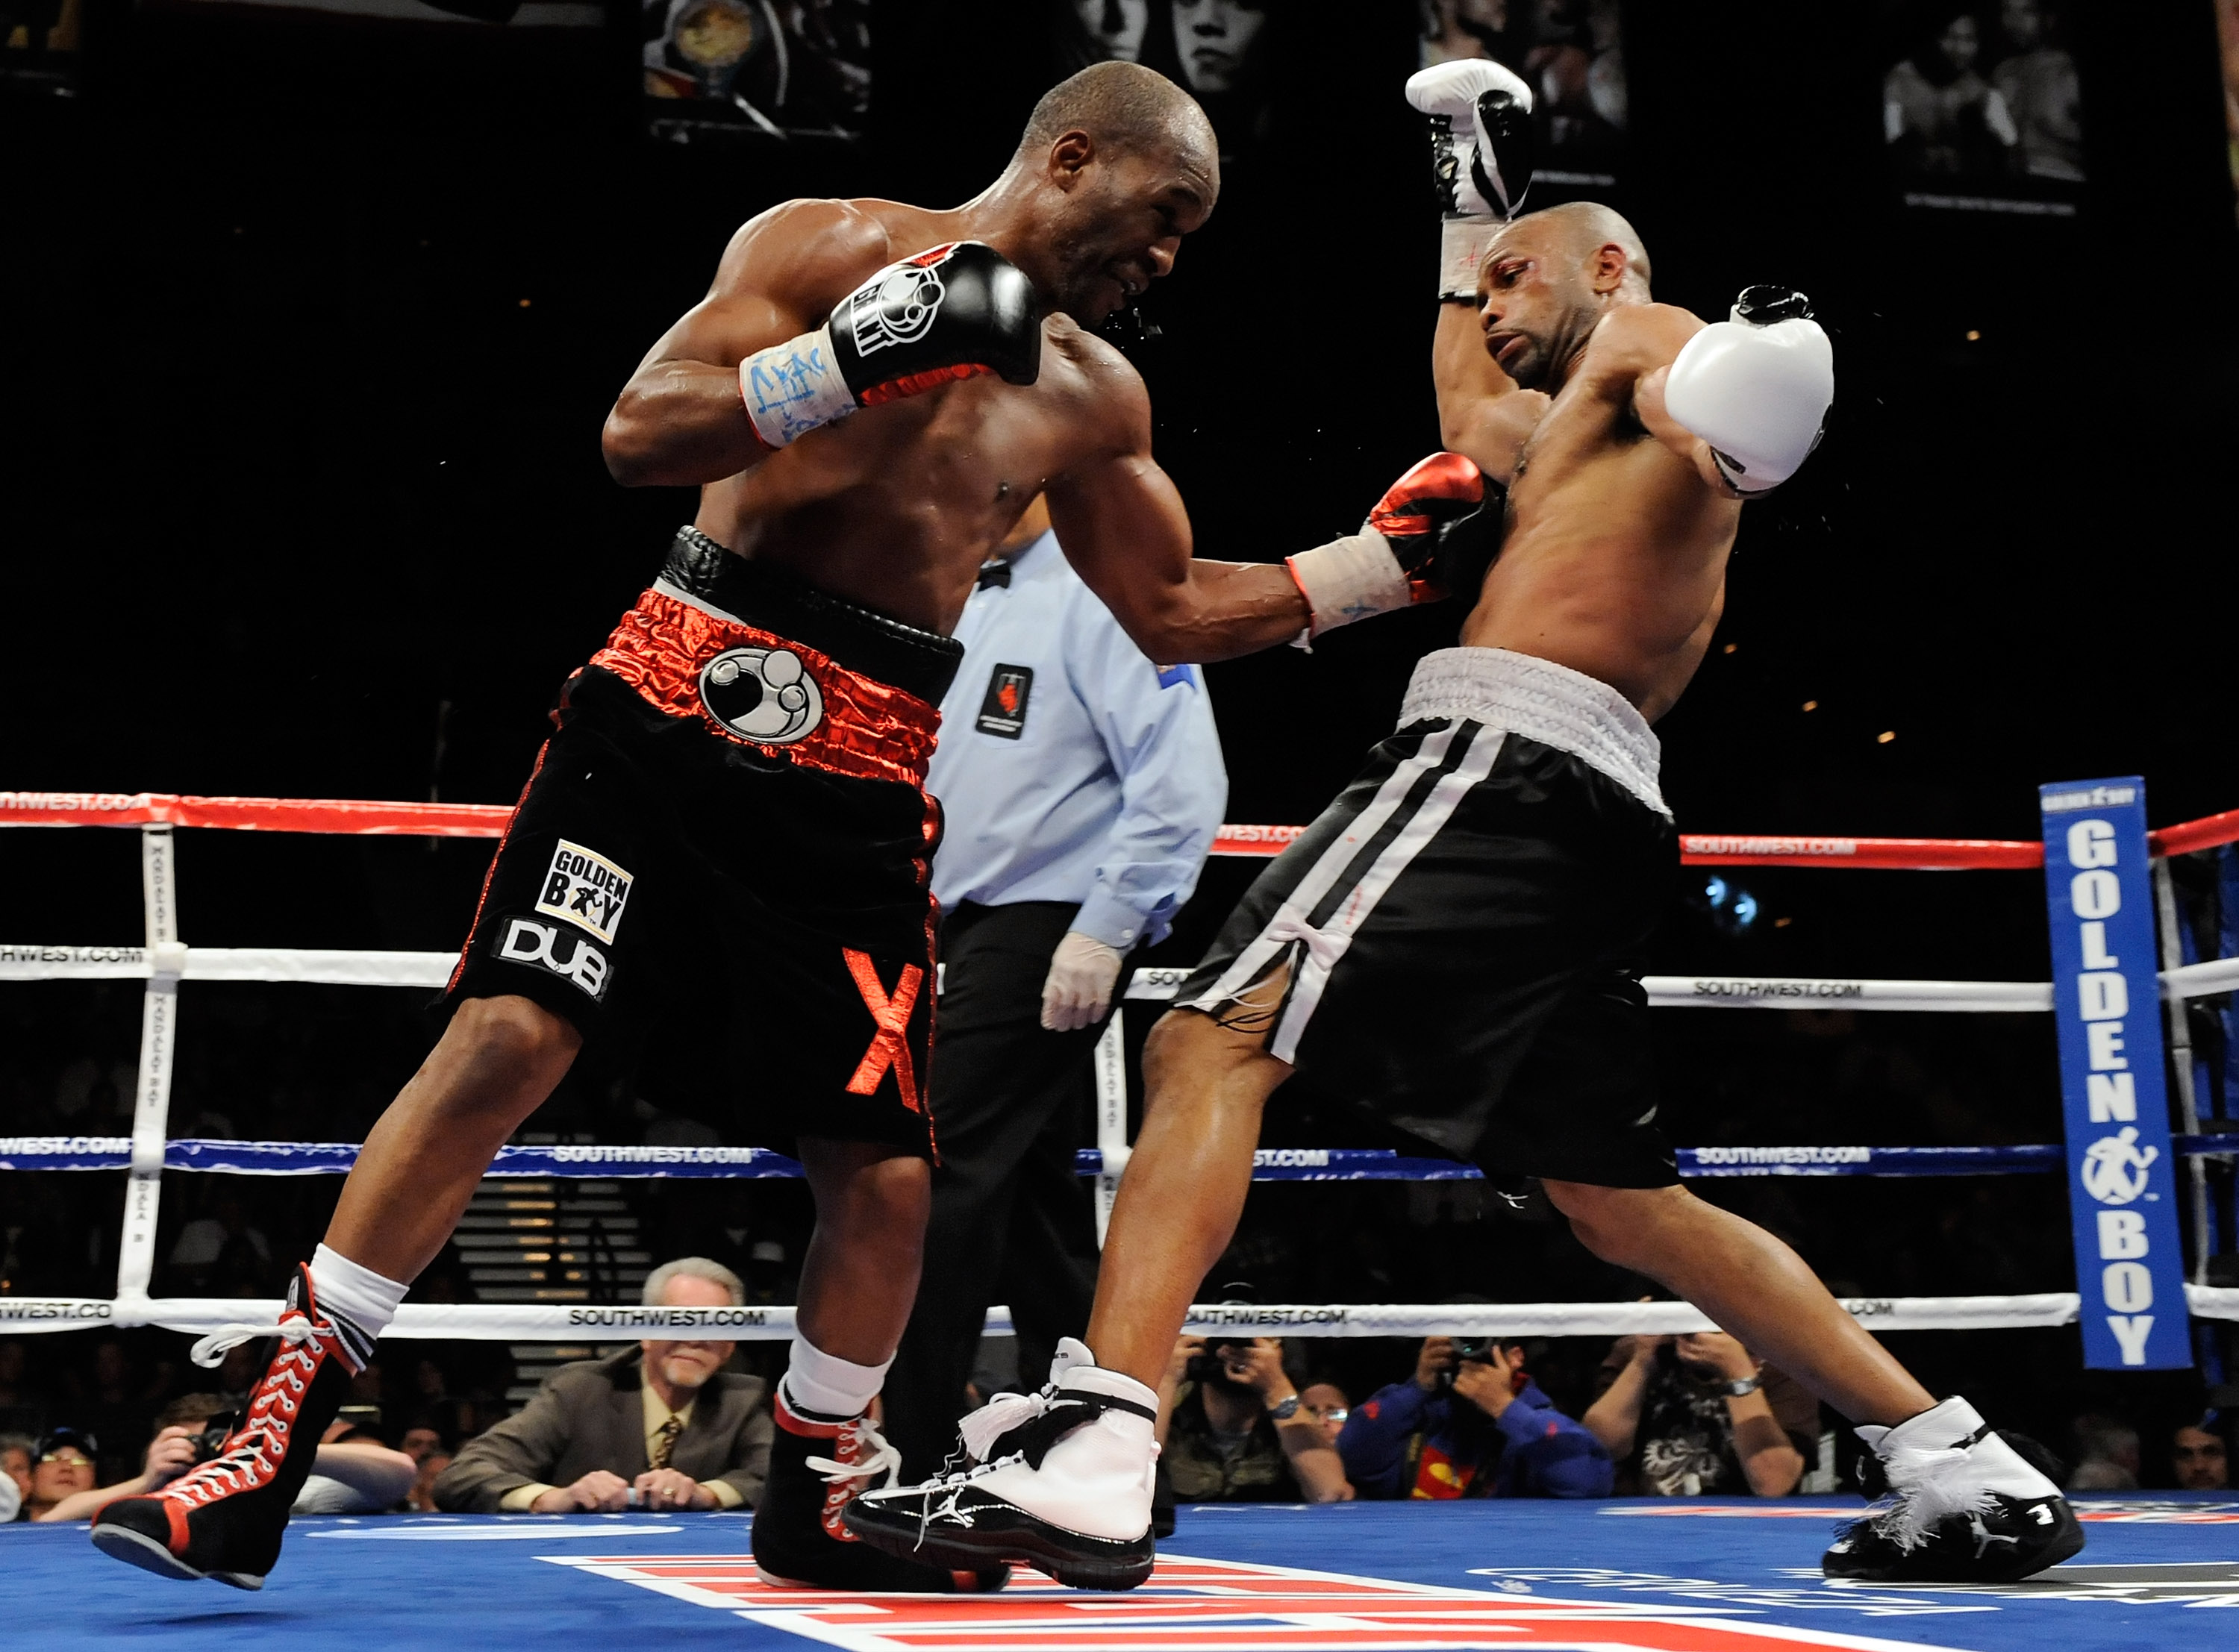 LAS VEGAS - APRIL 03:  Bernard Hopkins (L) hits Roy Jones Jr. during the 11th round of their light heavyweight bout at the Mandalay Bay Events Center April 3, 2010 in Las Vegas, Nevada. Hopkins won by unanimous decision.  (Photo by Ethan Miller/Getty Imag